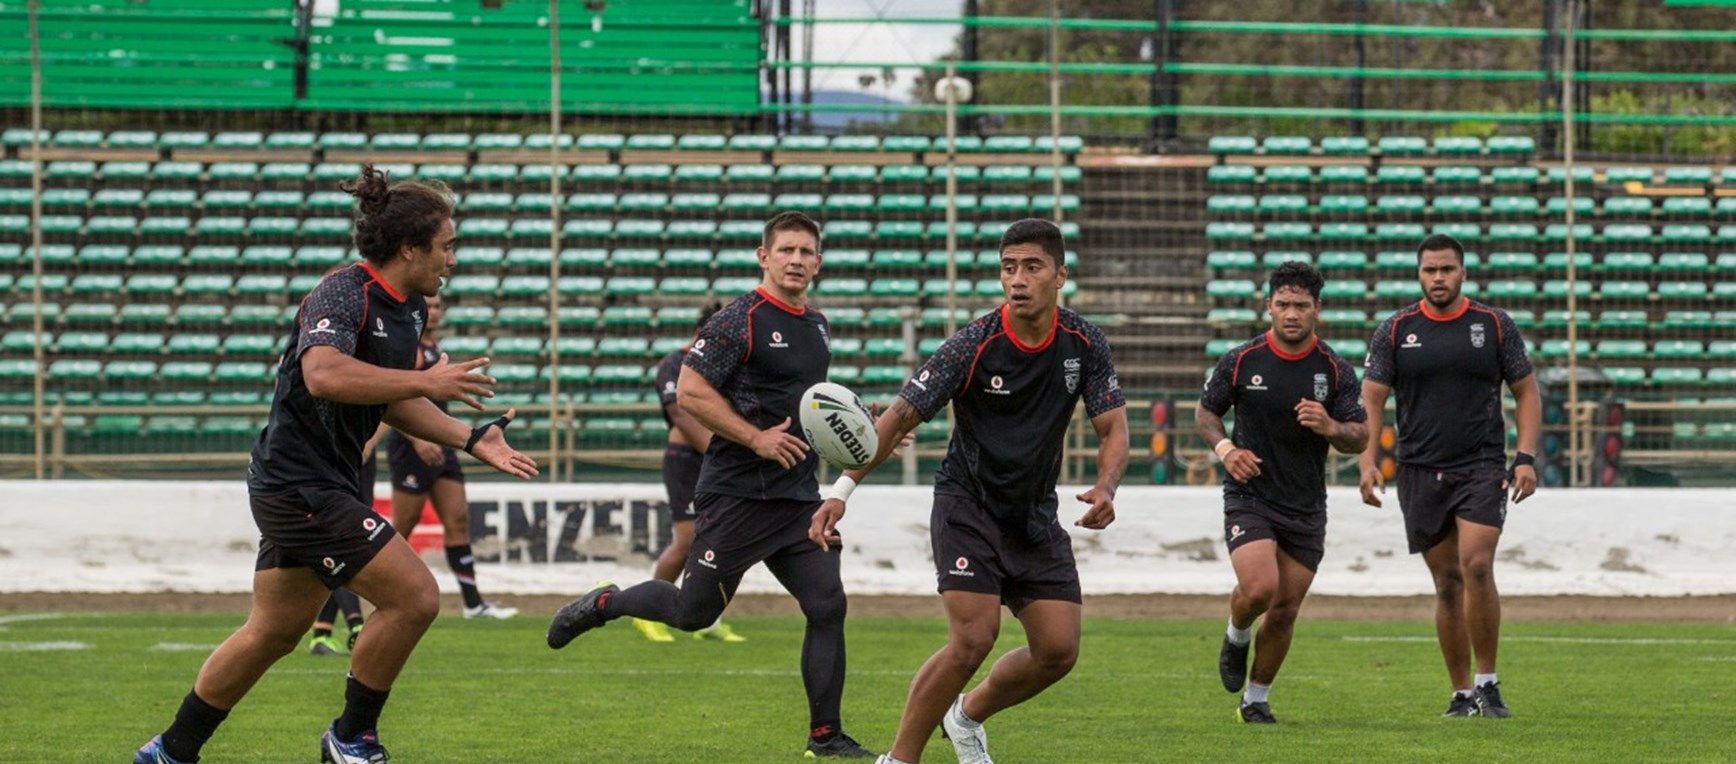 Palmerston North training in pictures